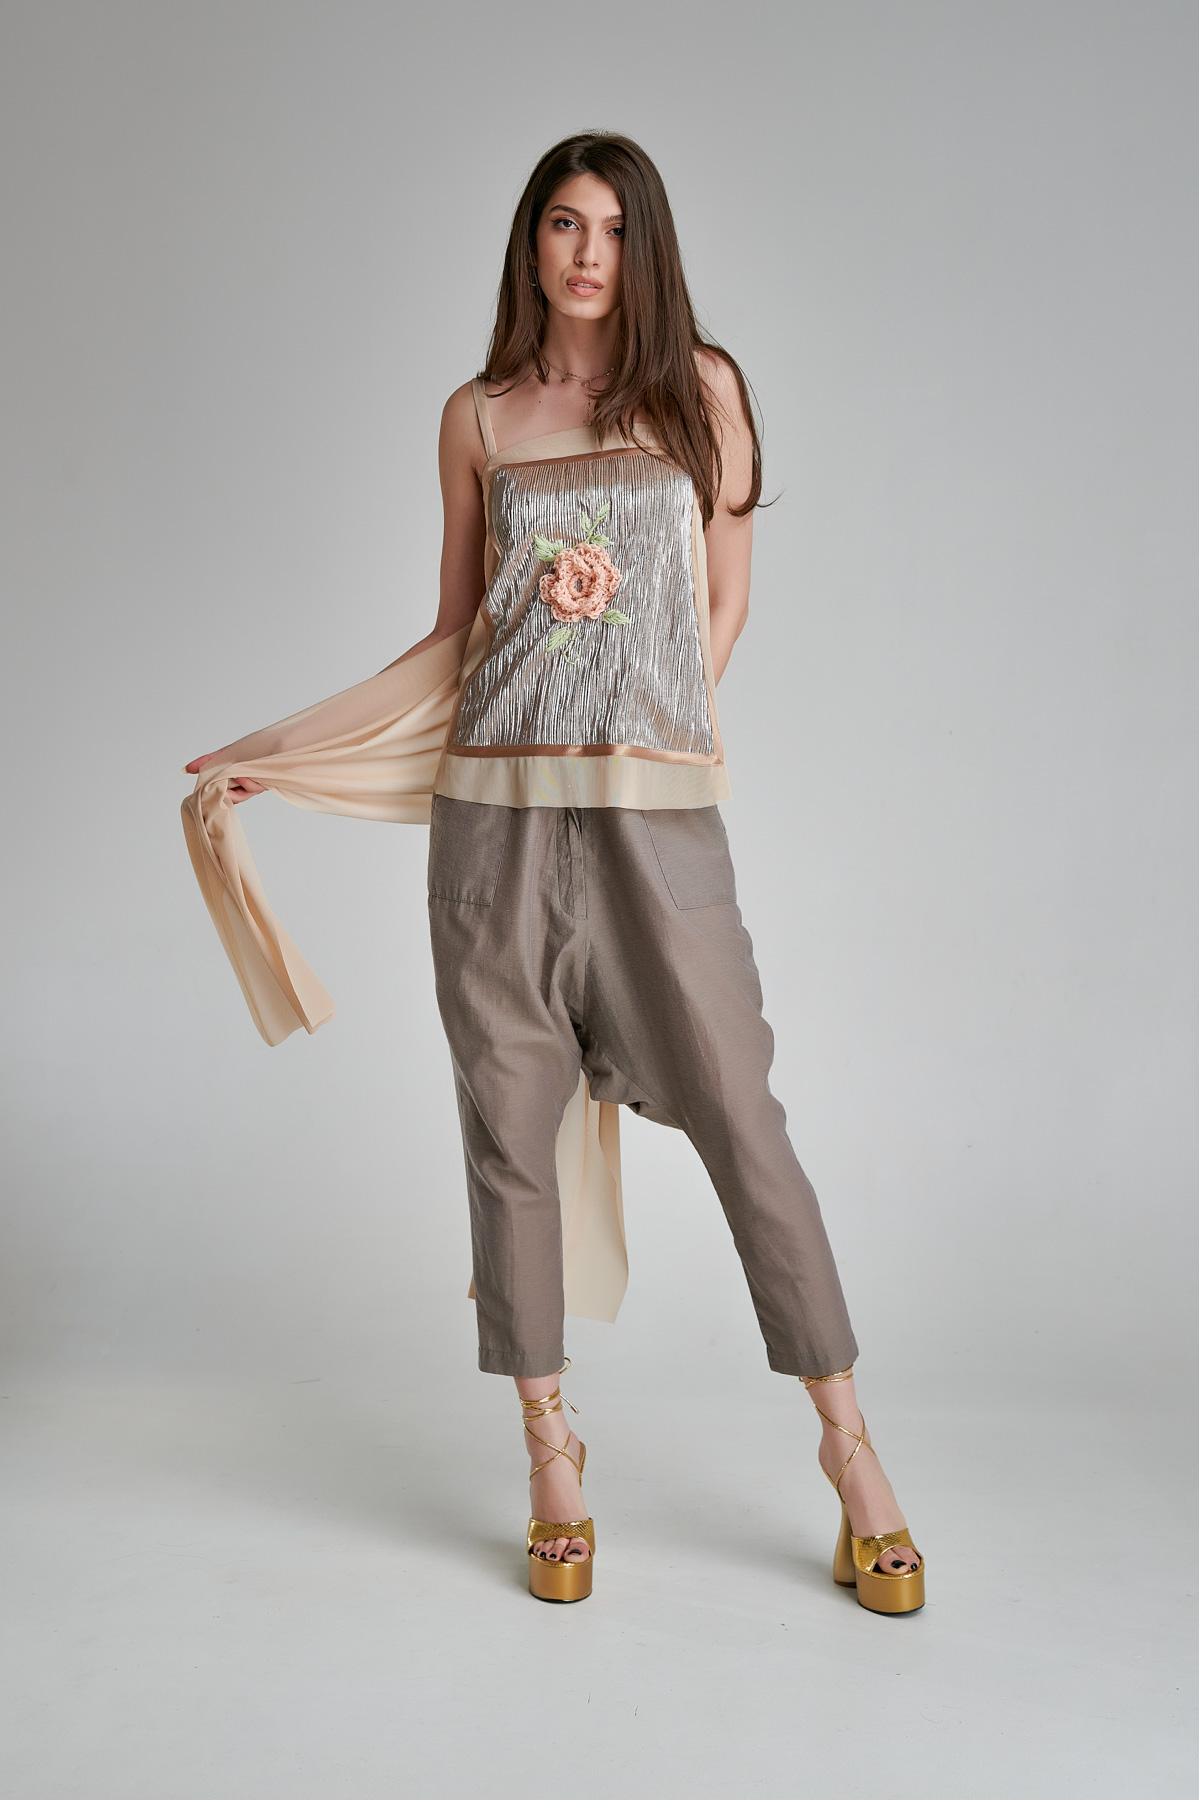 TERAMIS cotton trousers with a slightly loose fit. Natural fabrics, original design, handmade embroidery